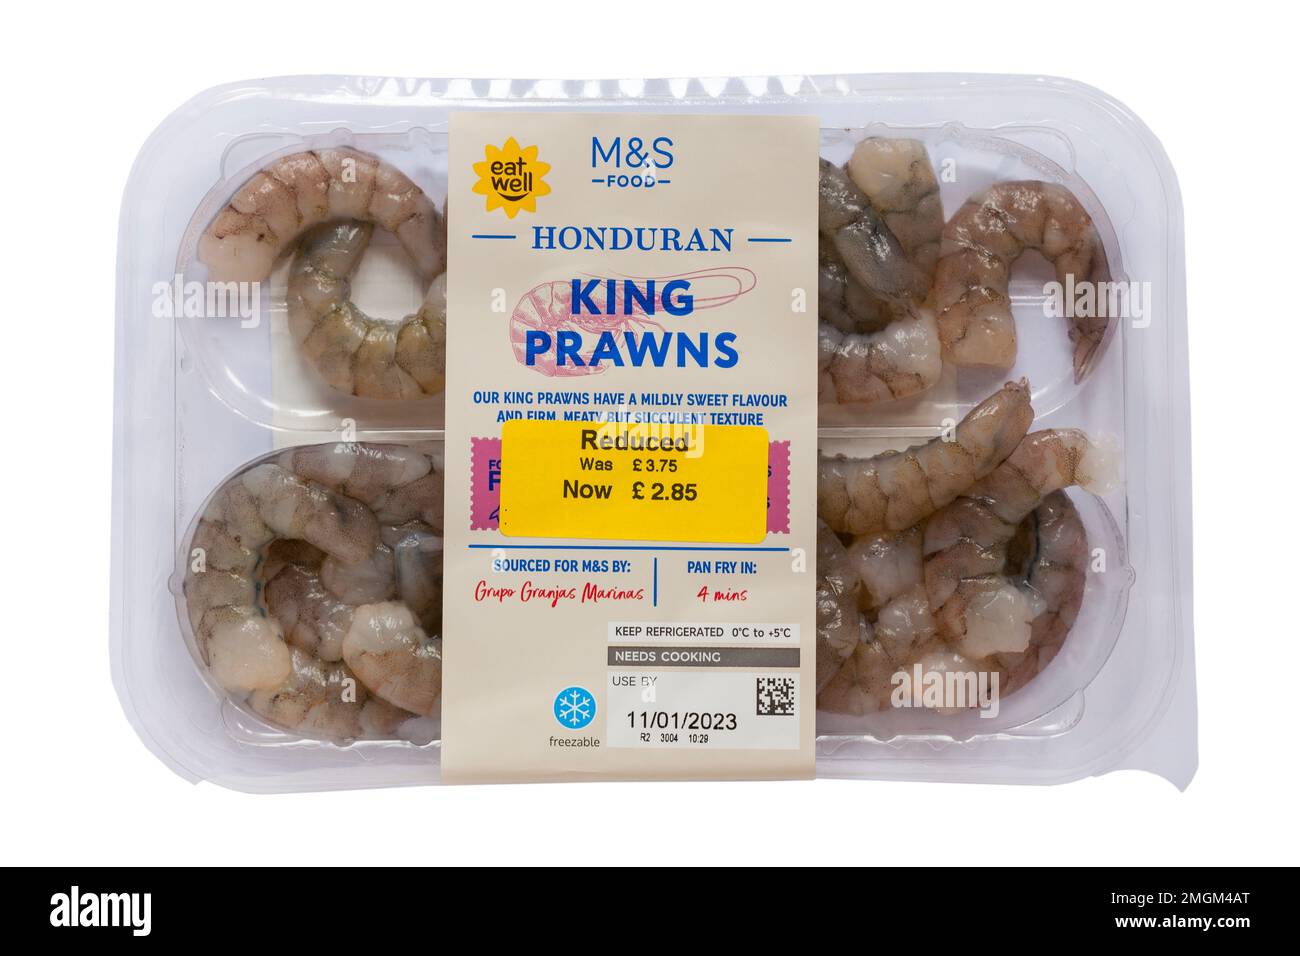 Honduran King Prawns (penaeus vannamei) from M&S our king prawns have a mildly sweet flavour and firm meaty but succulent texture sold in UK Stock Photo